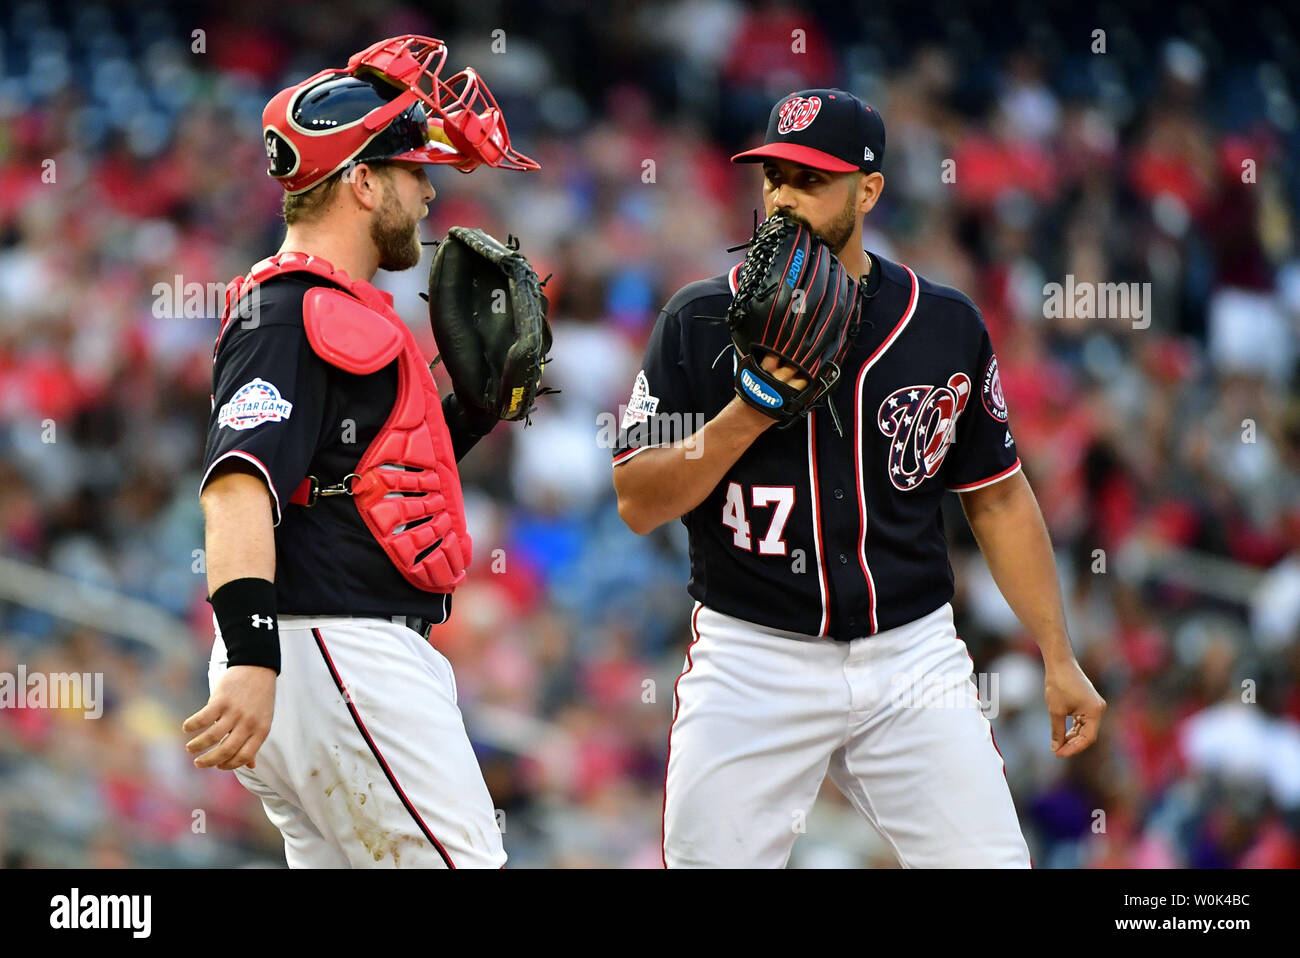 Washington Nationals starting pitcher Gio Gonzalez (47) talks to catcher Spencer Kieboom in the third inning against the Miami Marlins at Nationals Park in Washington, D.C. on July 6, 2018. Photo by Kevin Dietsch/UPI Stock Photo